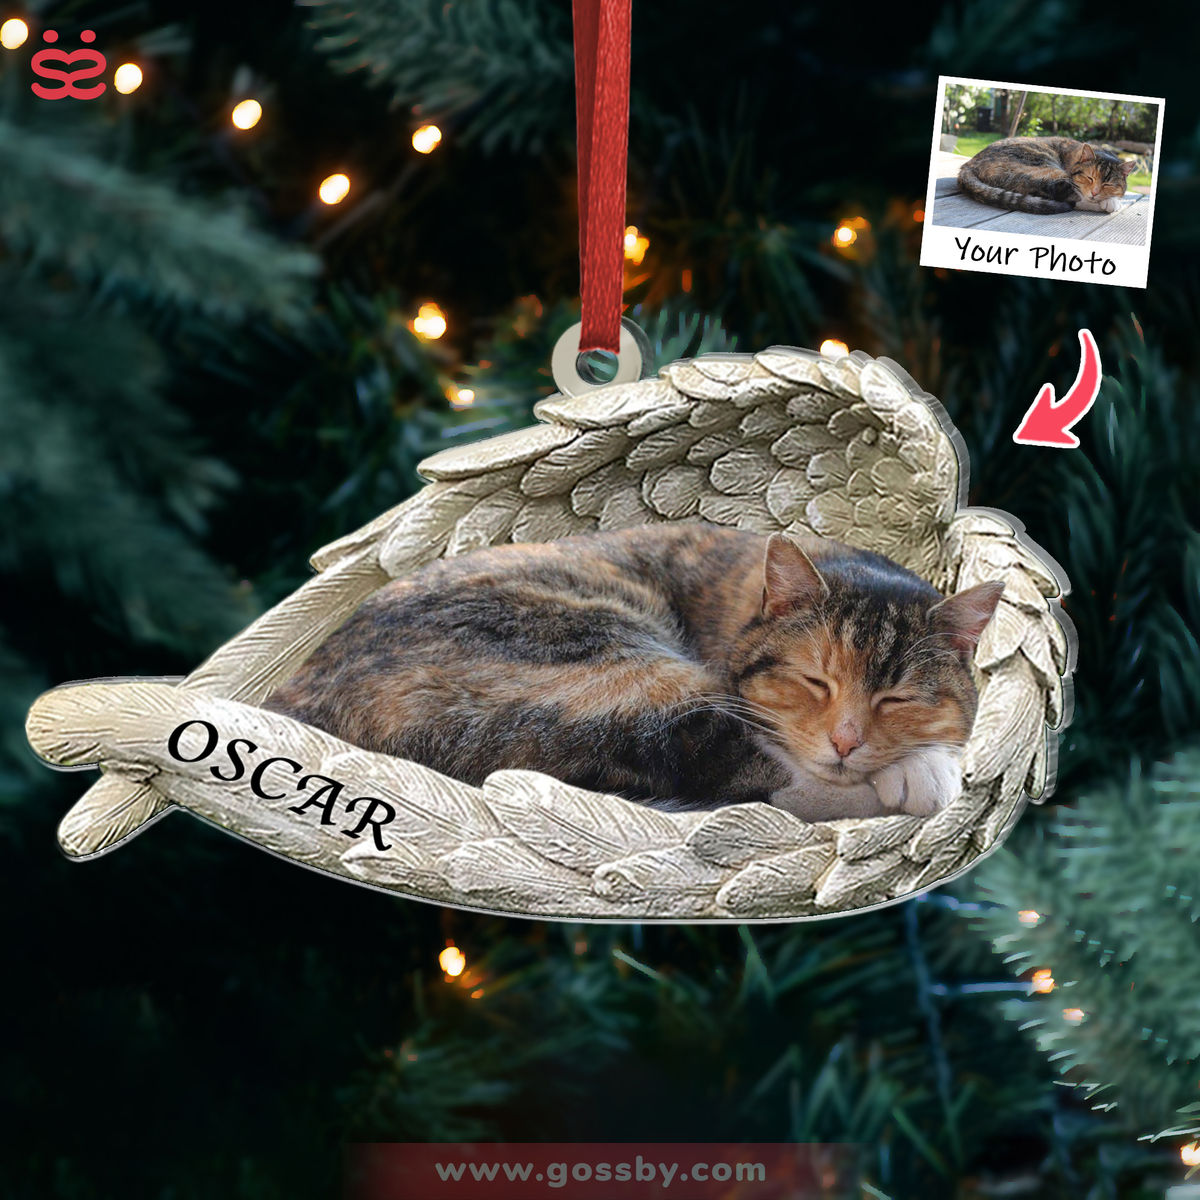 Cat Acrylic Ornament - Customized Your Photo Ornament - Sleeping Pet Within Angel Wings - Custom Ornament from Photo, Christmas Gifts